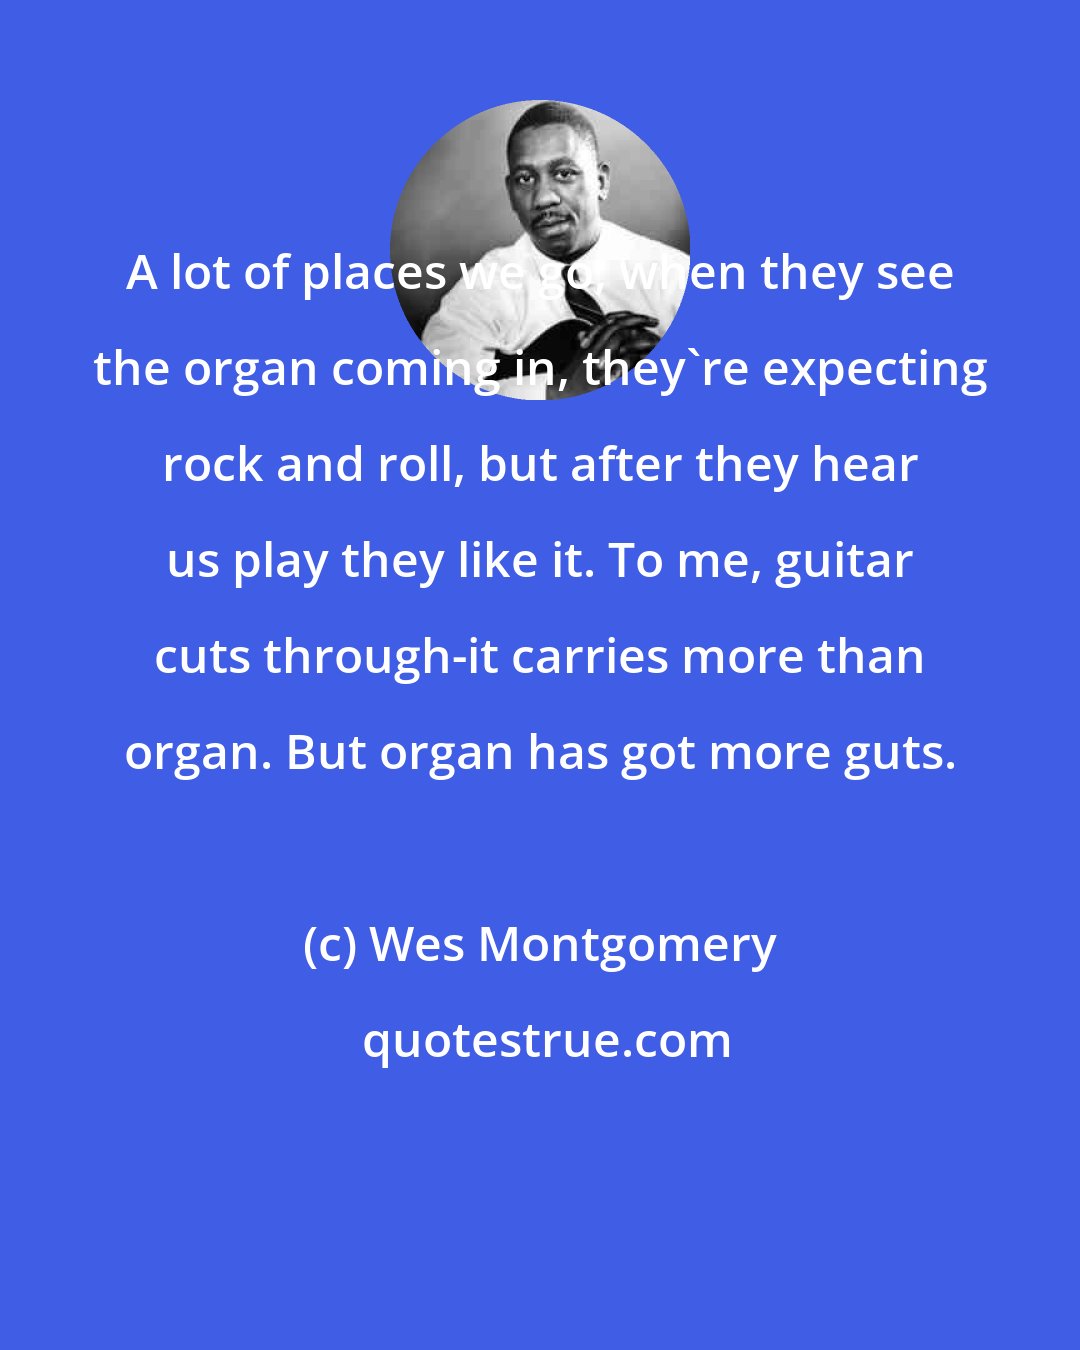 Wes Montgomery: A lot of places we go, when they see the organ coming in, they're expecting rock and roll, but after they hear us play they like it. To me, guitar cuts through-it carries more than organ. But organ has got more guts.